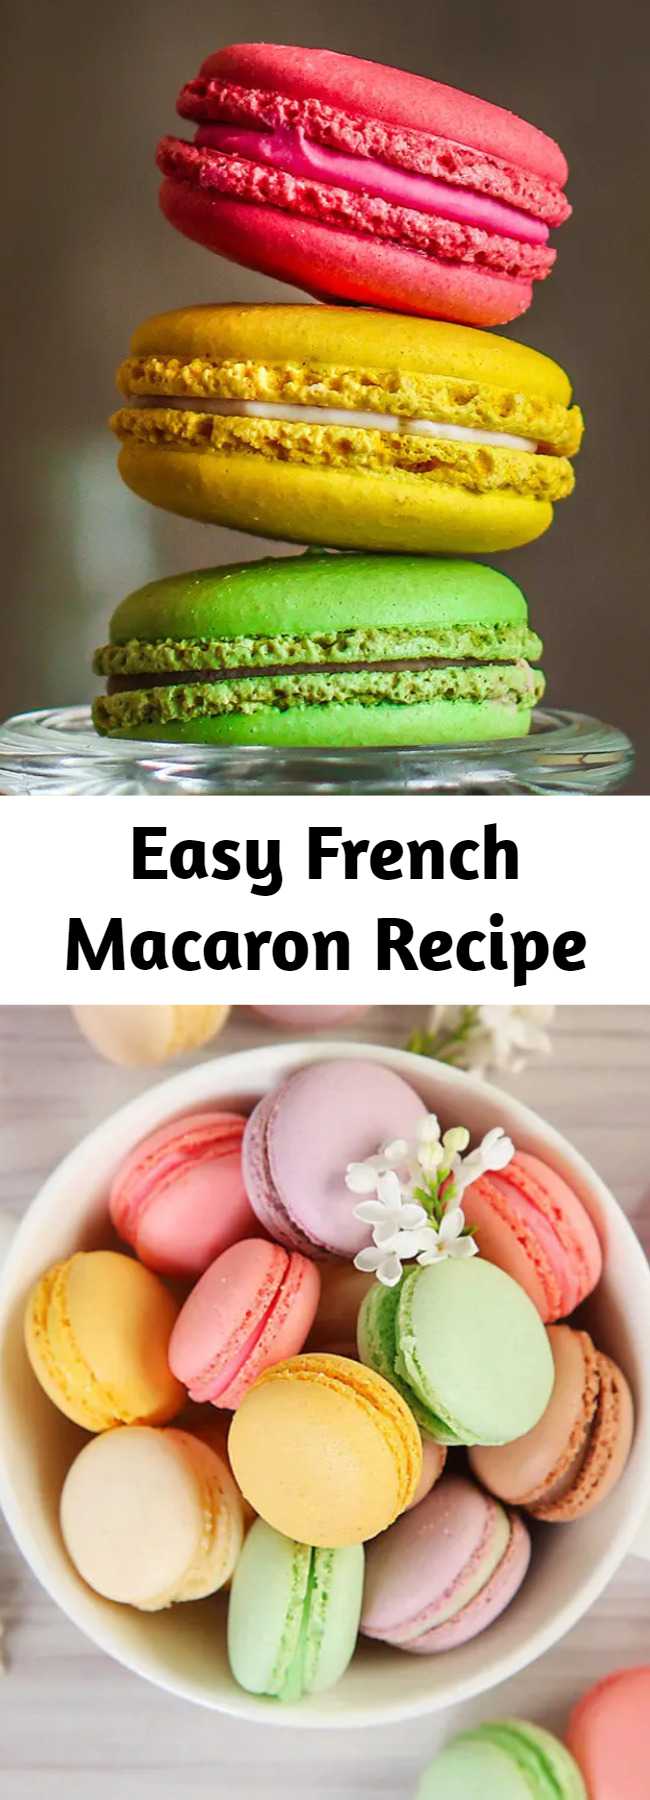 Easy French Macaron Recipe - This is an easy how to make crispy, crunchy, chewy french macarons (pronounced mac-ah-rohn). I make a big batch of these and then freeze them so I have some on hand for these trendy cream tarts!